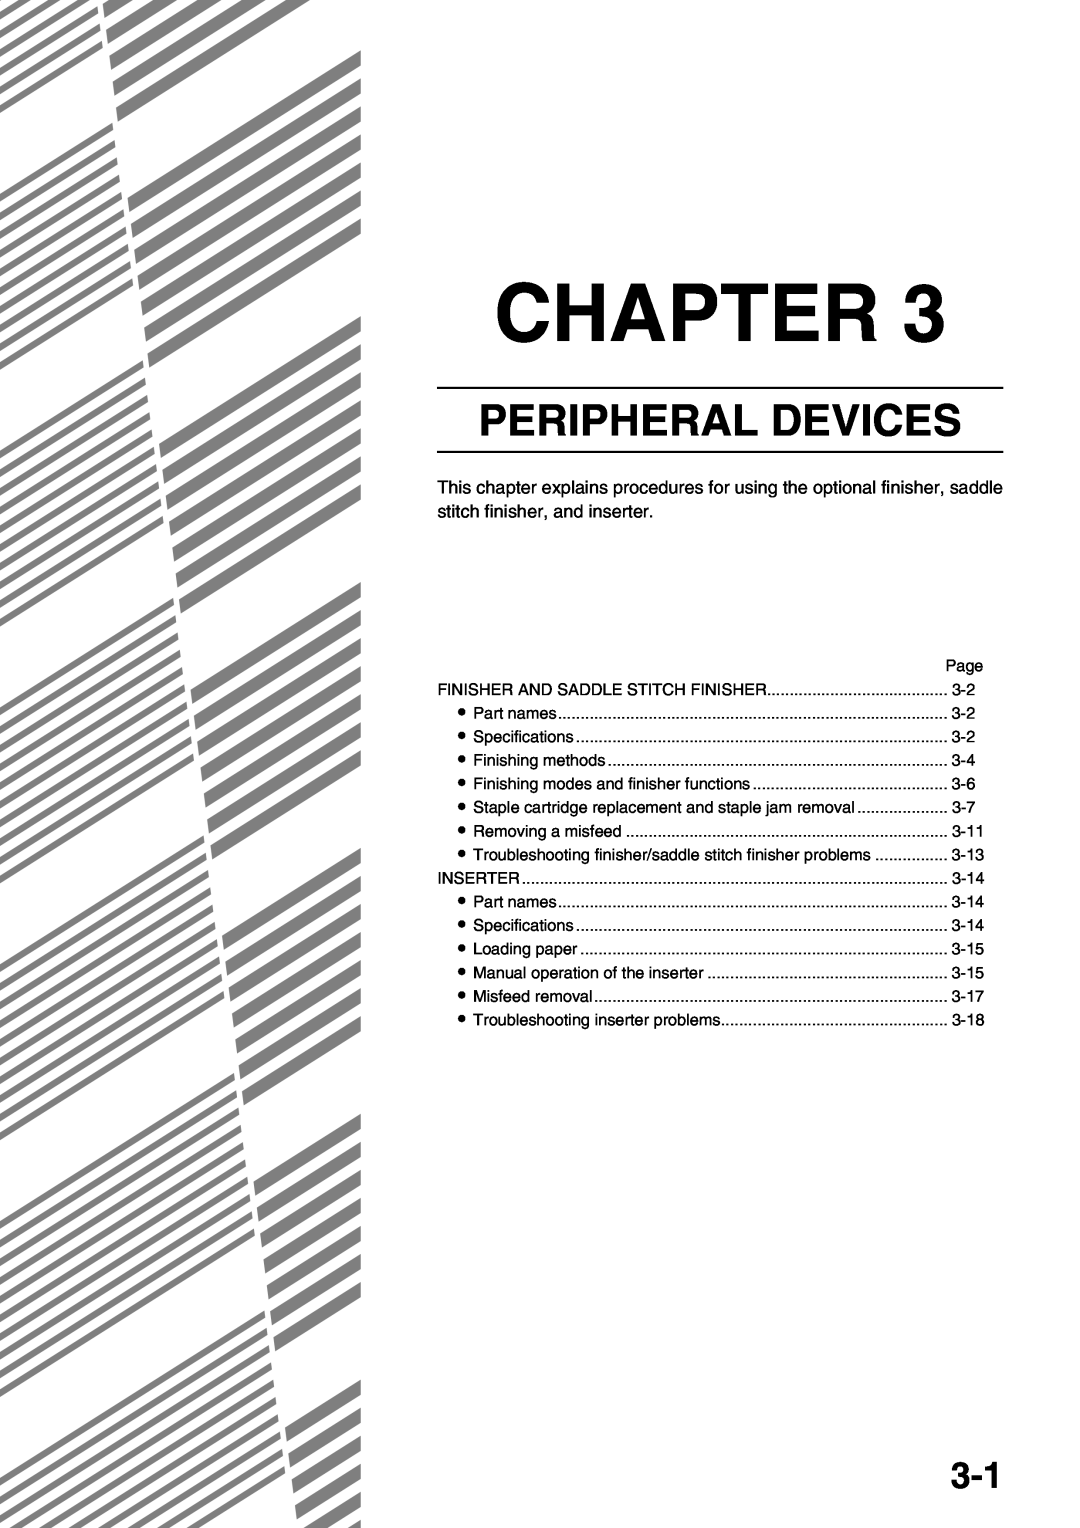 Sharp AR-M700N, AR-M700U, AR-M550N, AR-M620N, AR-M550U, AR-M620U specifications Peripheral Devices, Chapter 